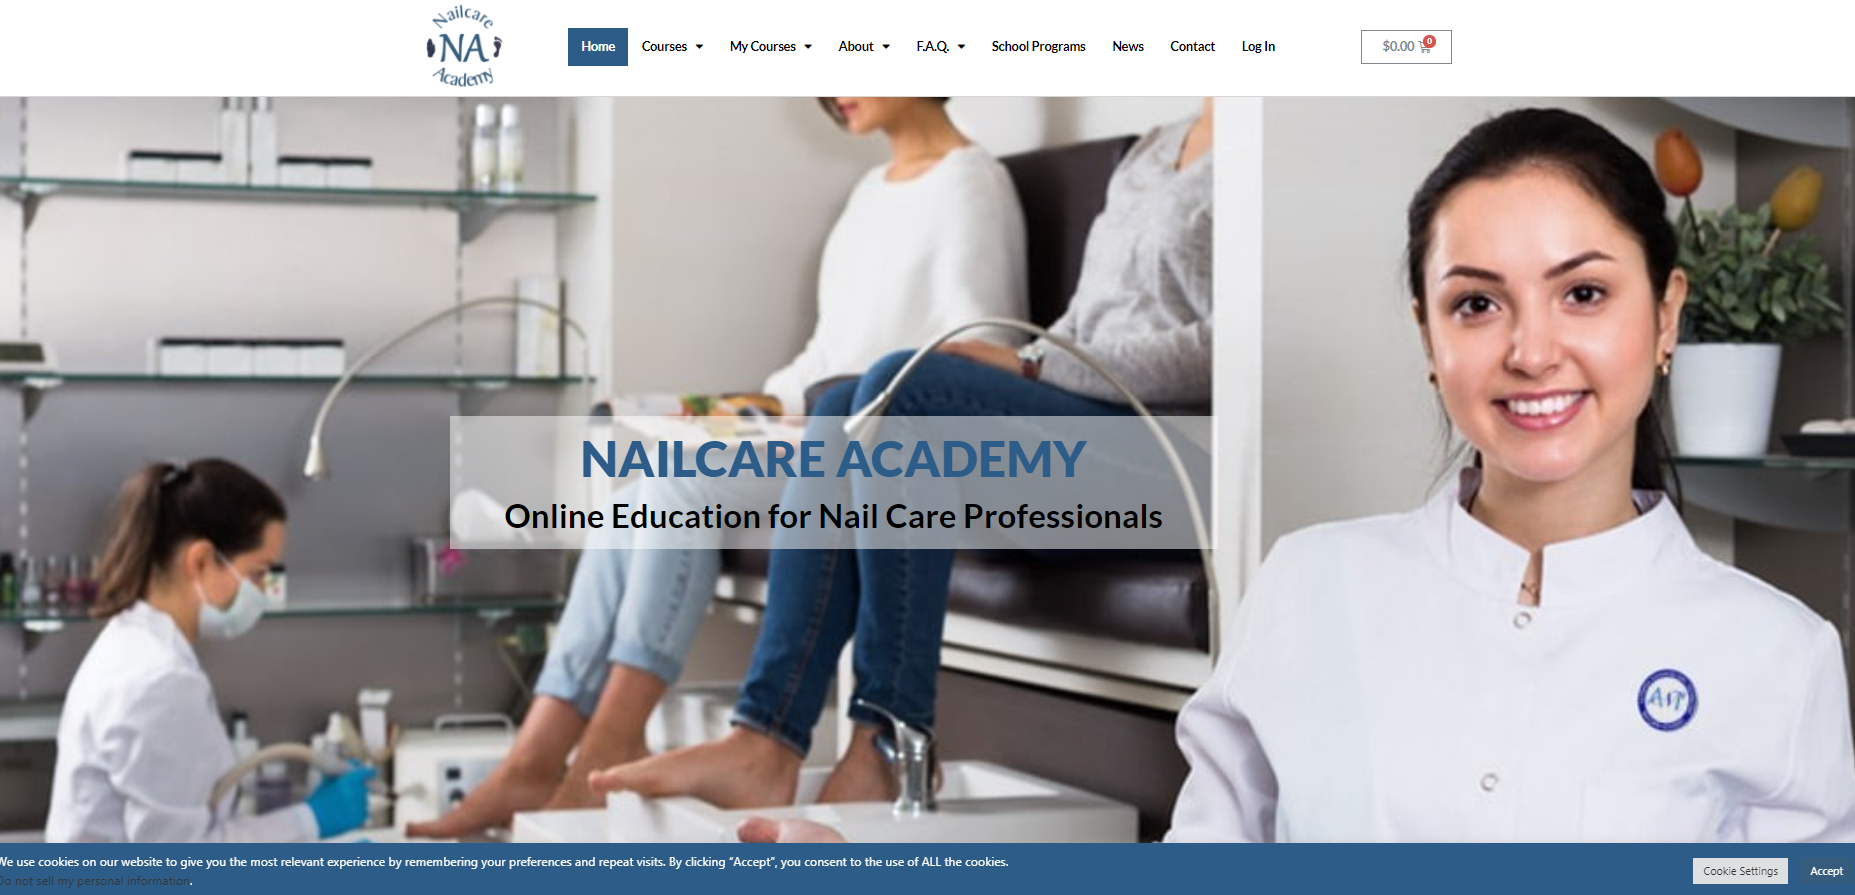 Nailcare-Academy Top 10 Best Online Nail Art Schools in 2021/2022